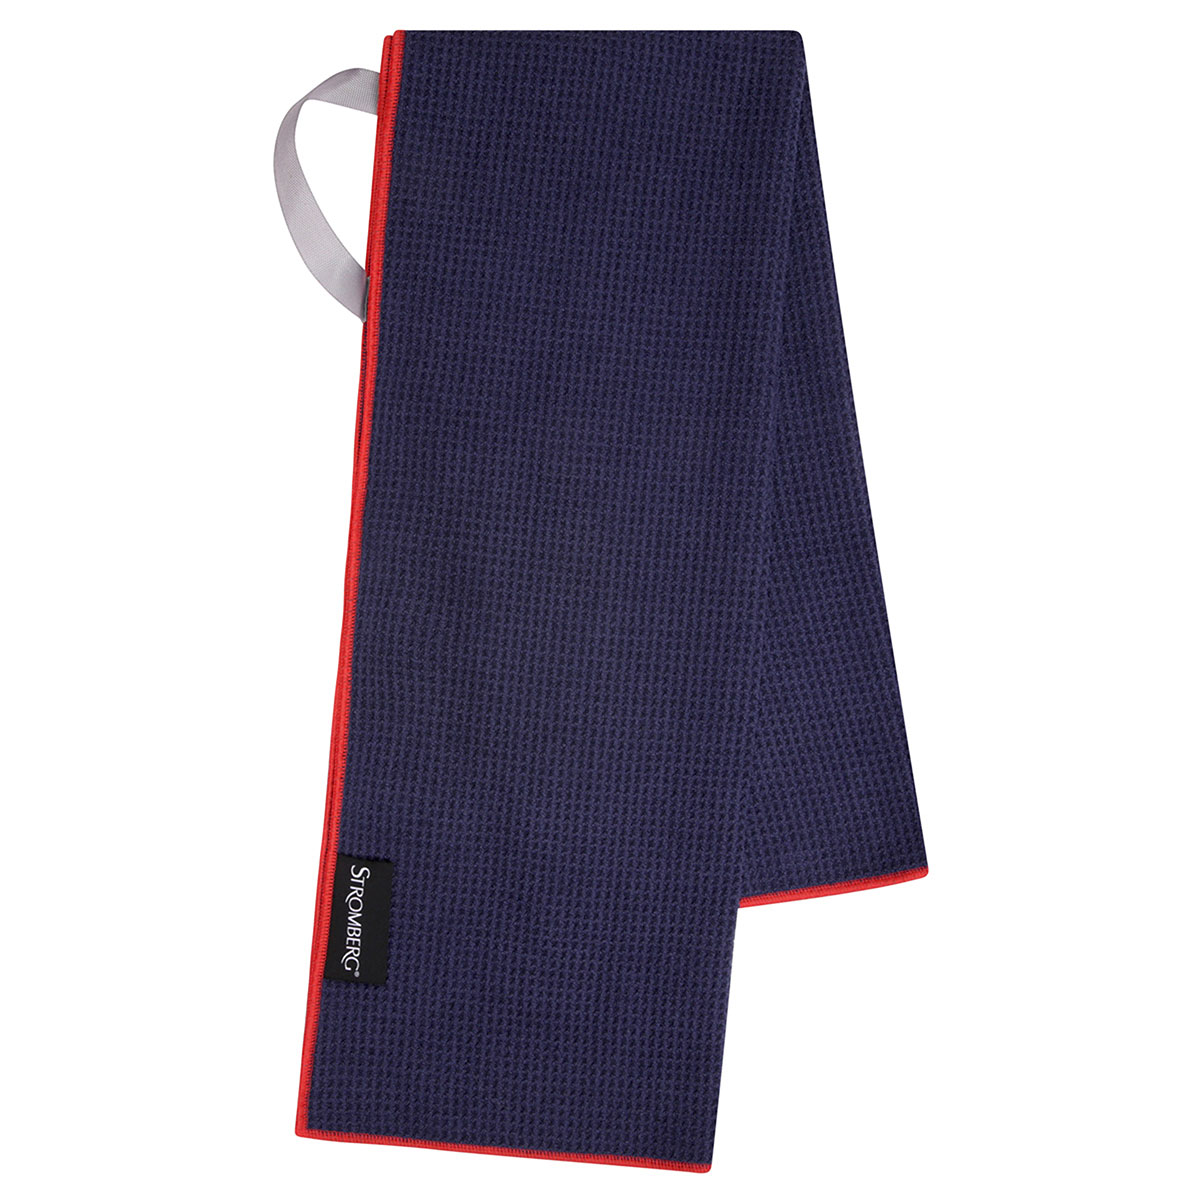 Stromberg 100% Microfibre Golf Towel Blue ST063TOW RRP £14.99 CLEARANCE XL £9.99